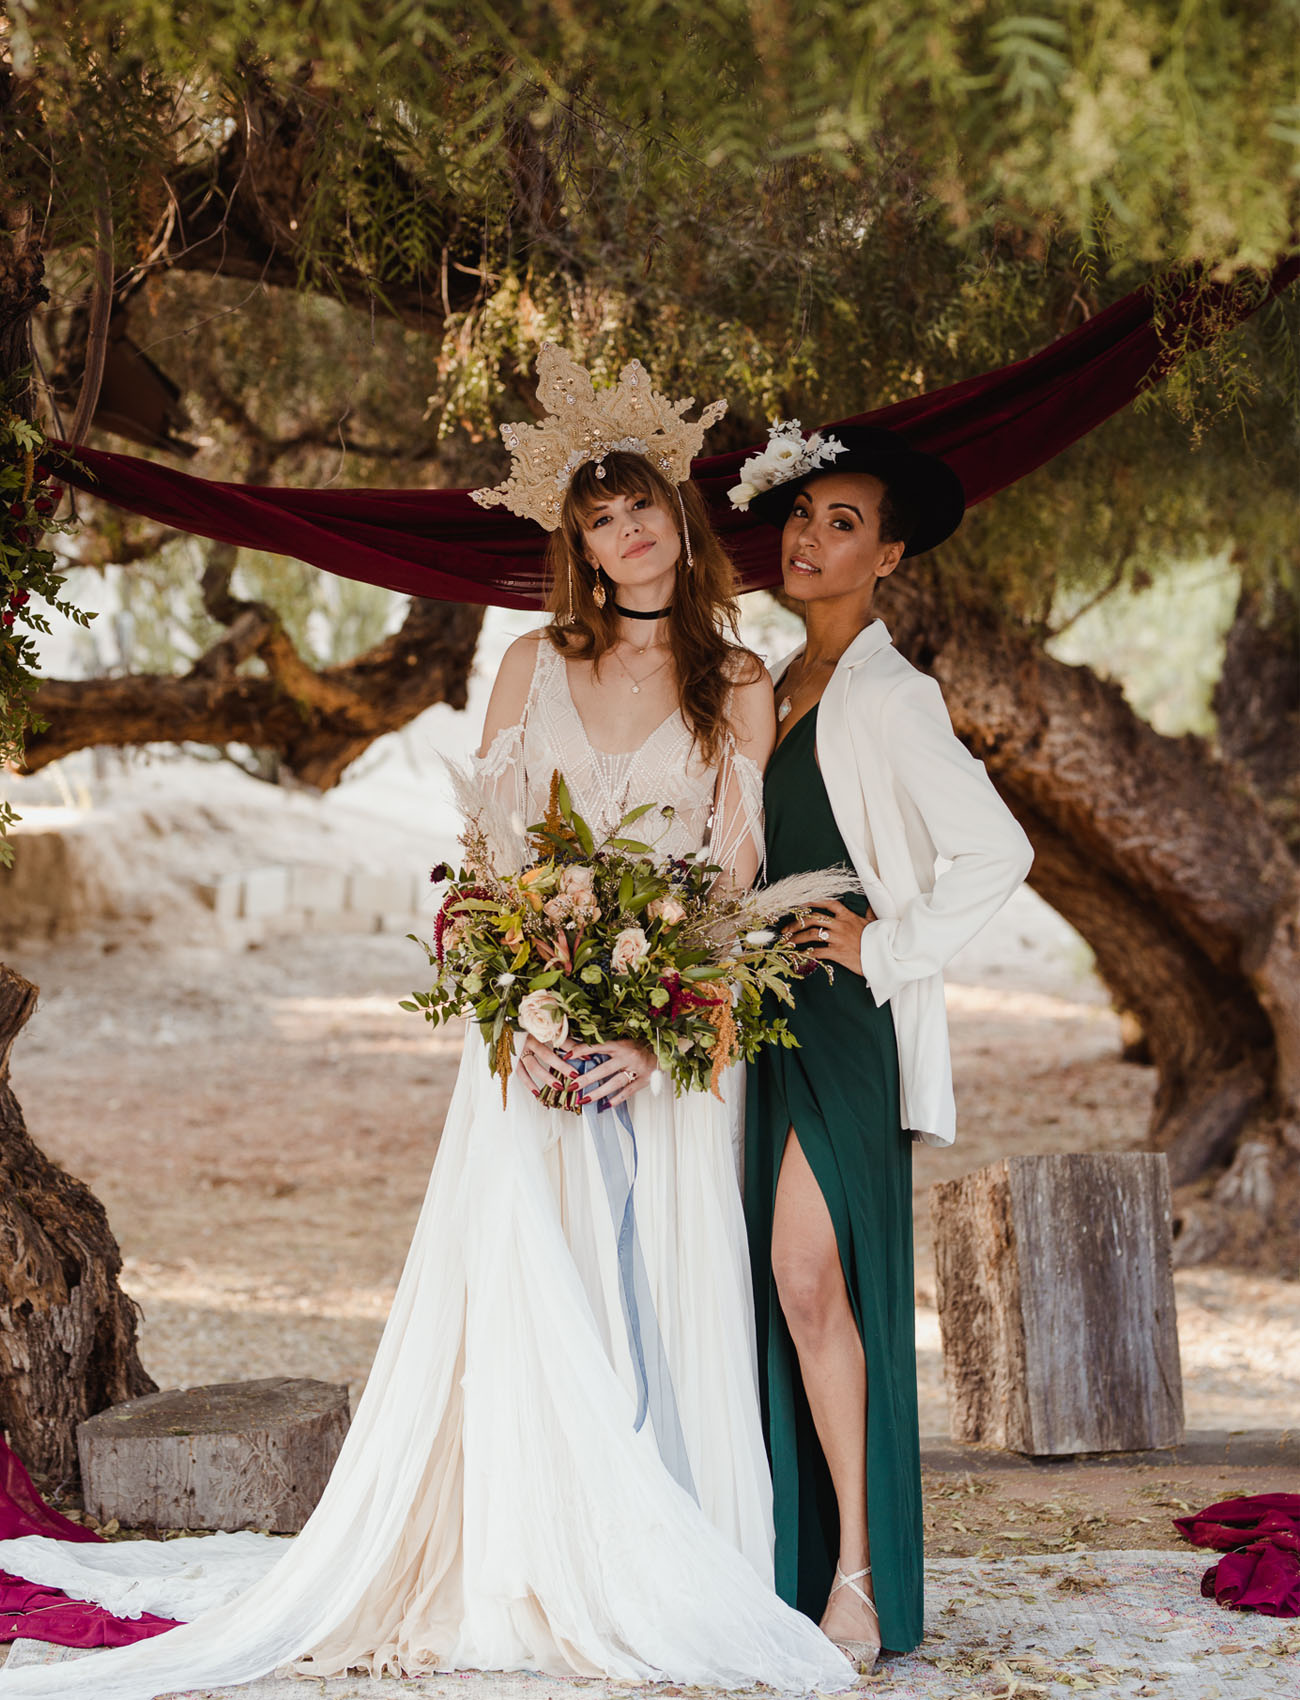 This playful witchy wedding shoot is nod to Halloween   this is a fresh take on Halloween weddings